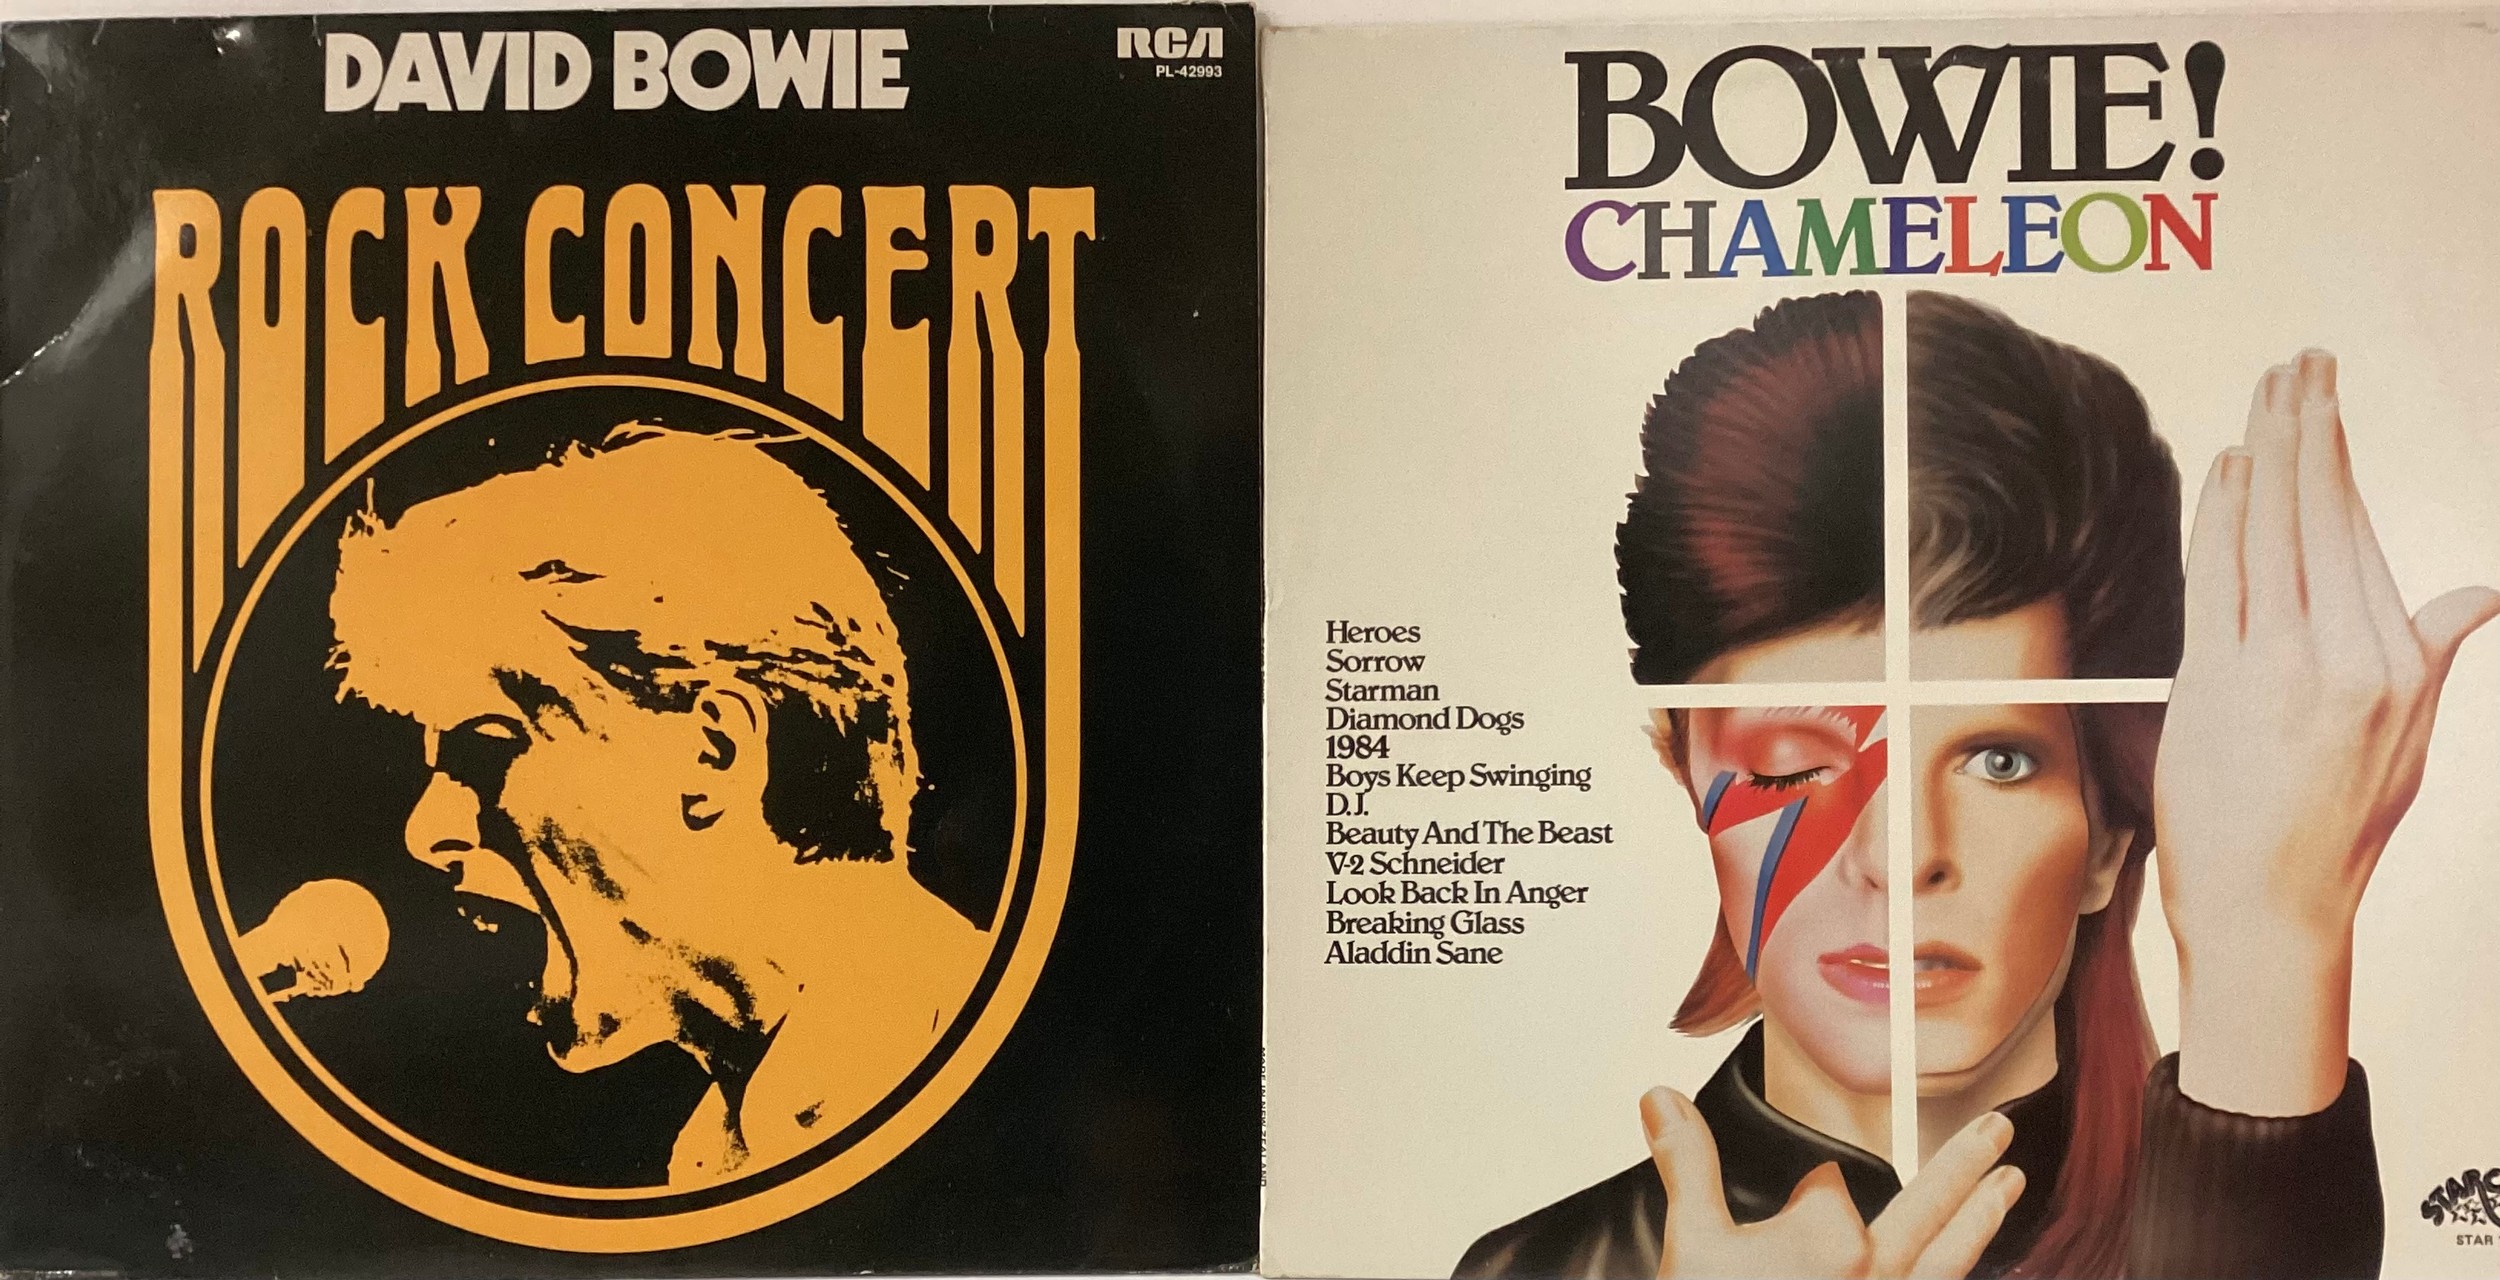 DAVID BOWIE FOREIGN RELEASED VINYL ALBUMS. Starting here with an Australian copy of ‘Chameleon’ on